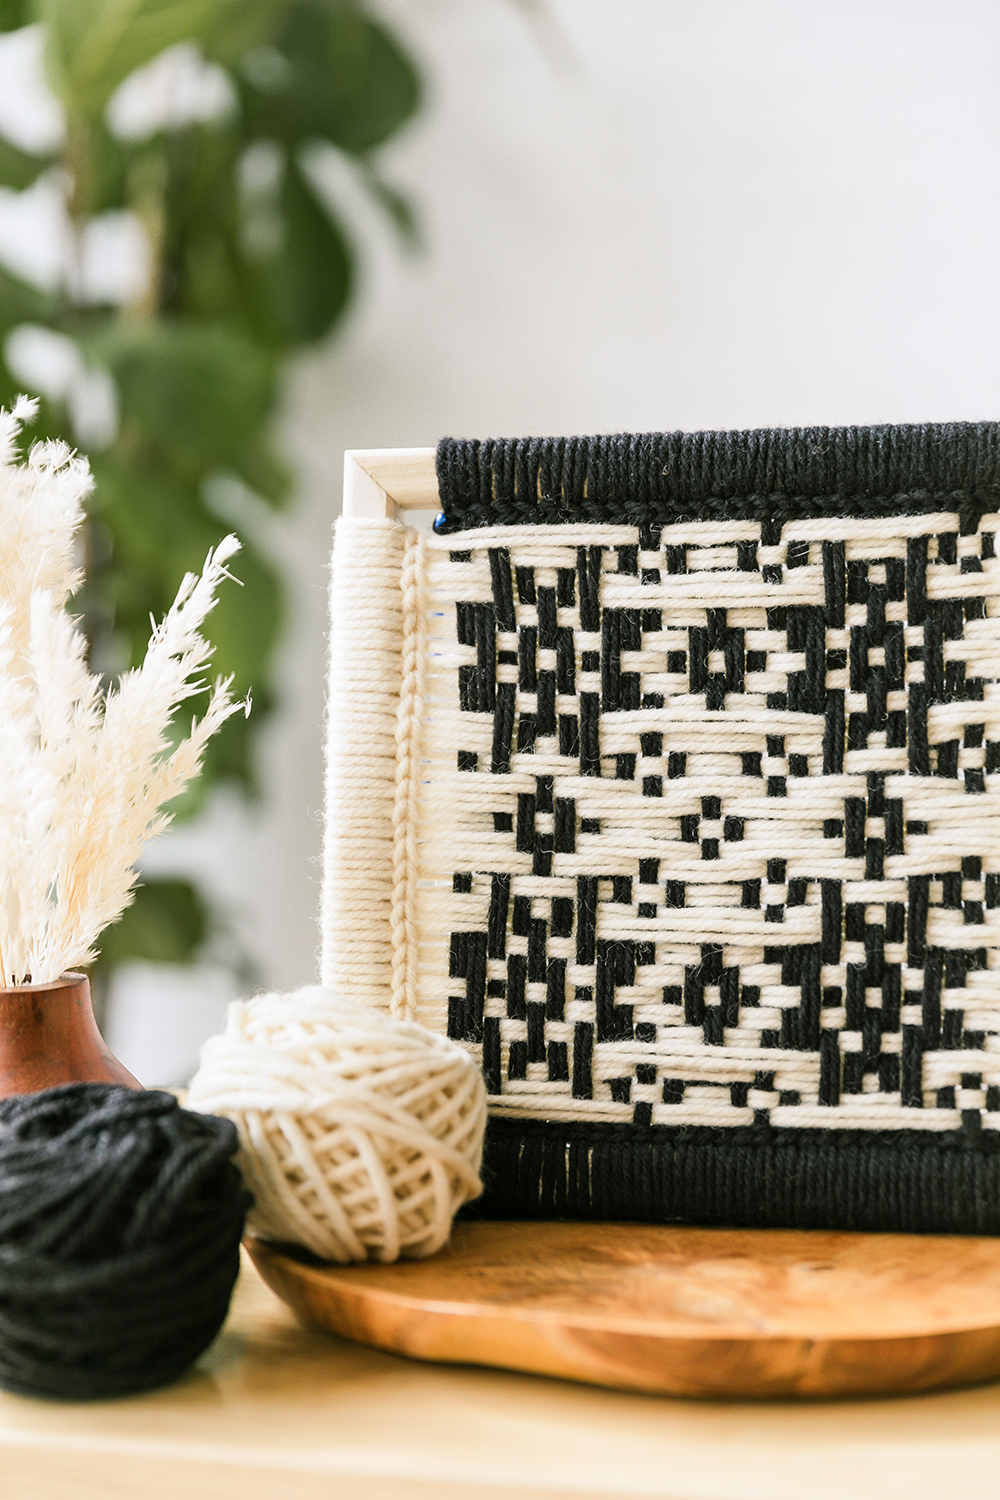 Frame Weaving | Lindsey Campbell | The Crafter's Box